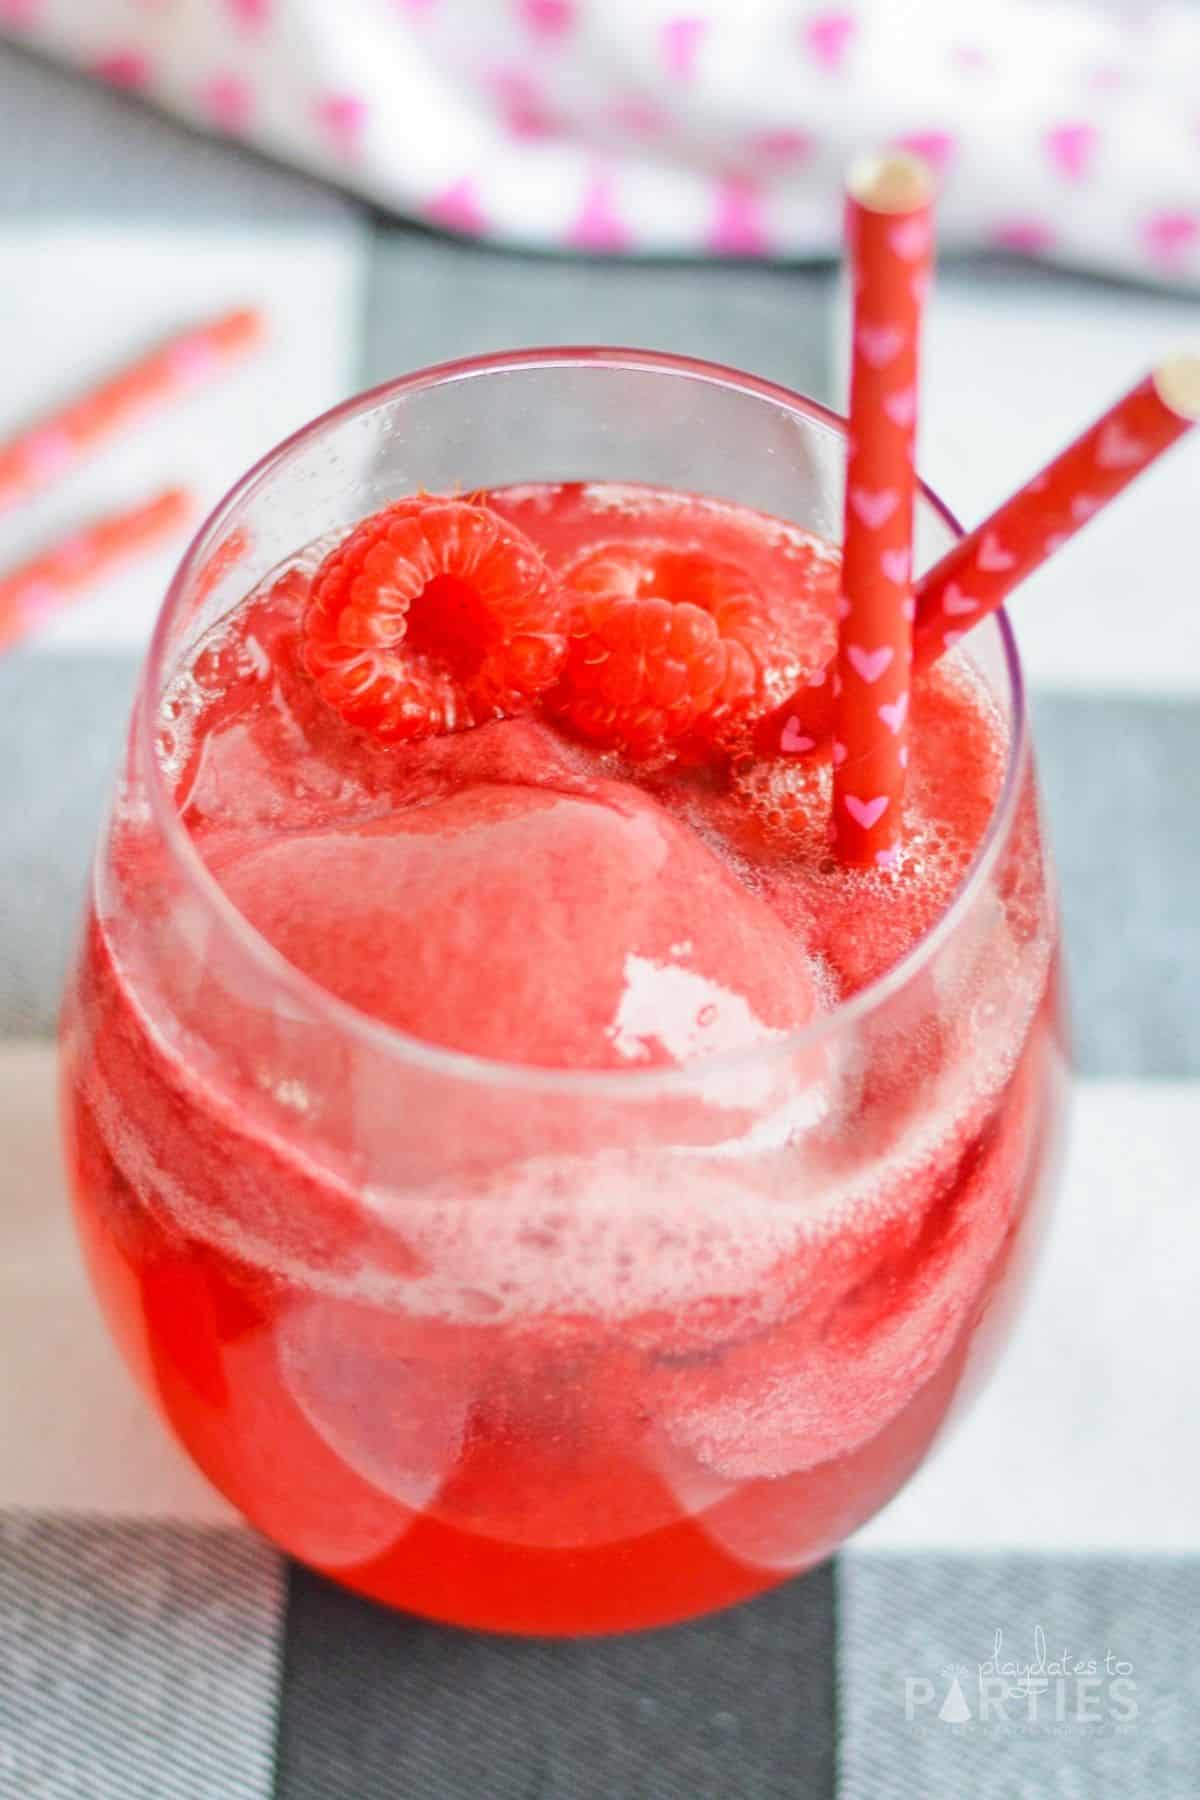 Looking into a wine glass with champagne, sorbet, and fresh raspberries.